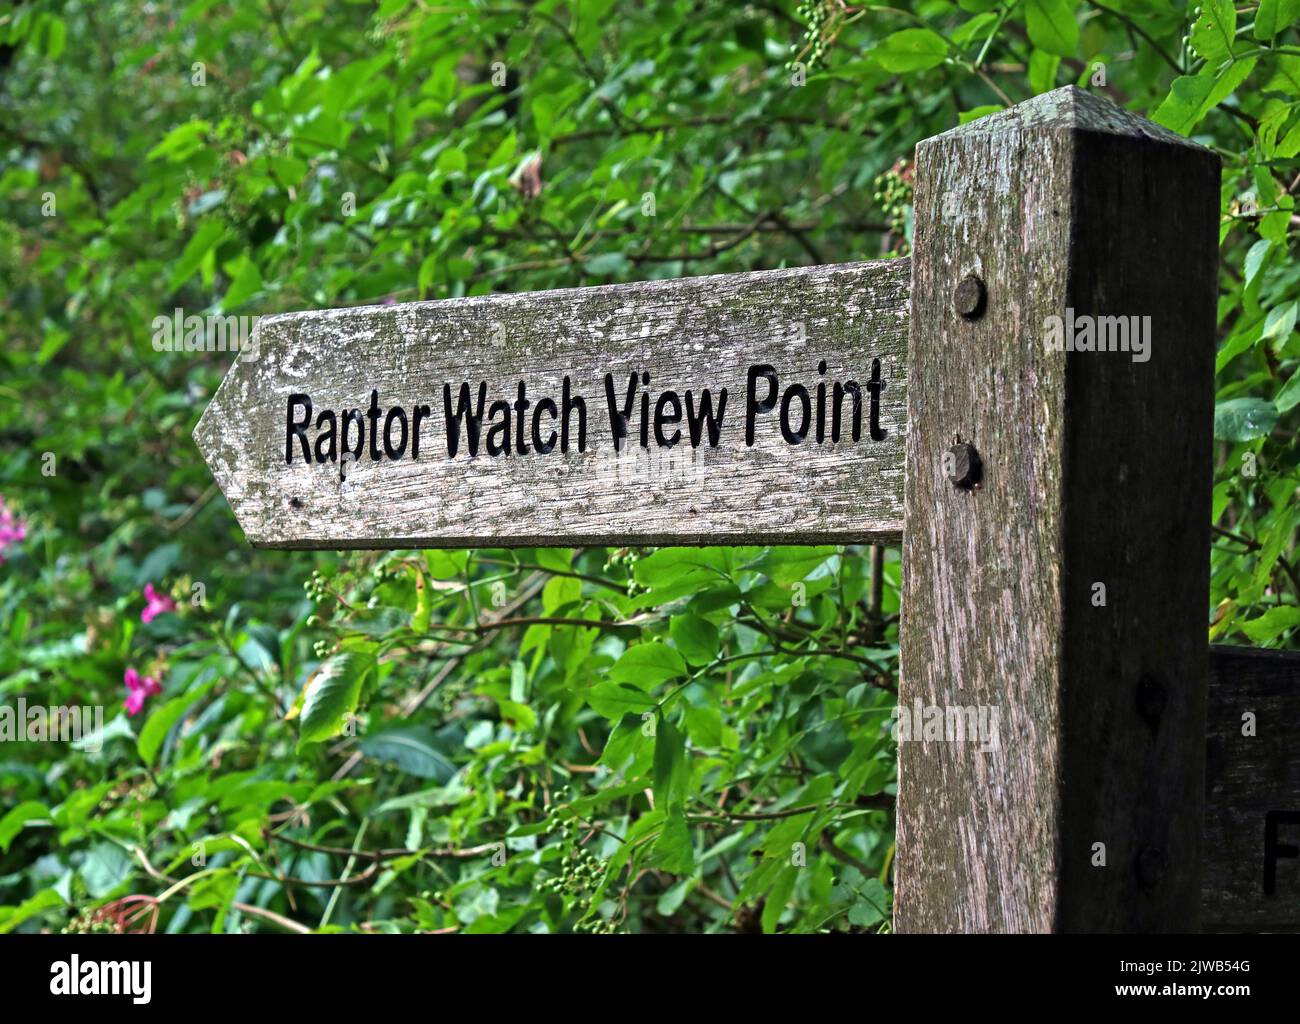 Moore nature reserve , Raptor Watch View Point sign, Lapwing Ln, Penketh, Cheshire, Warrington, Cheshire, England, UK,  WA4 6XE Stock Photo